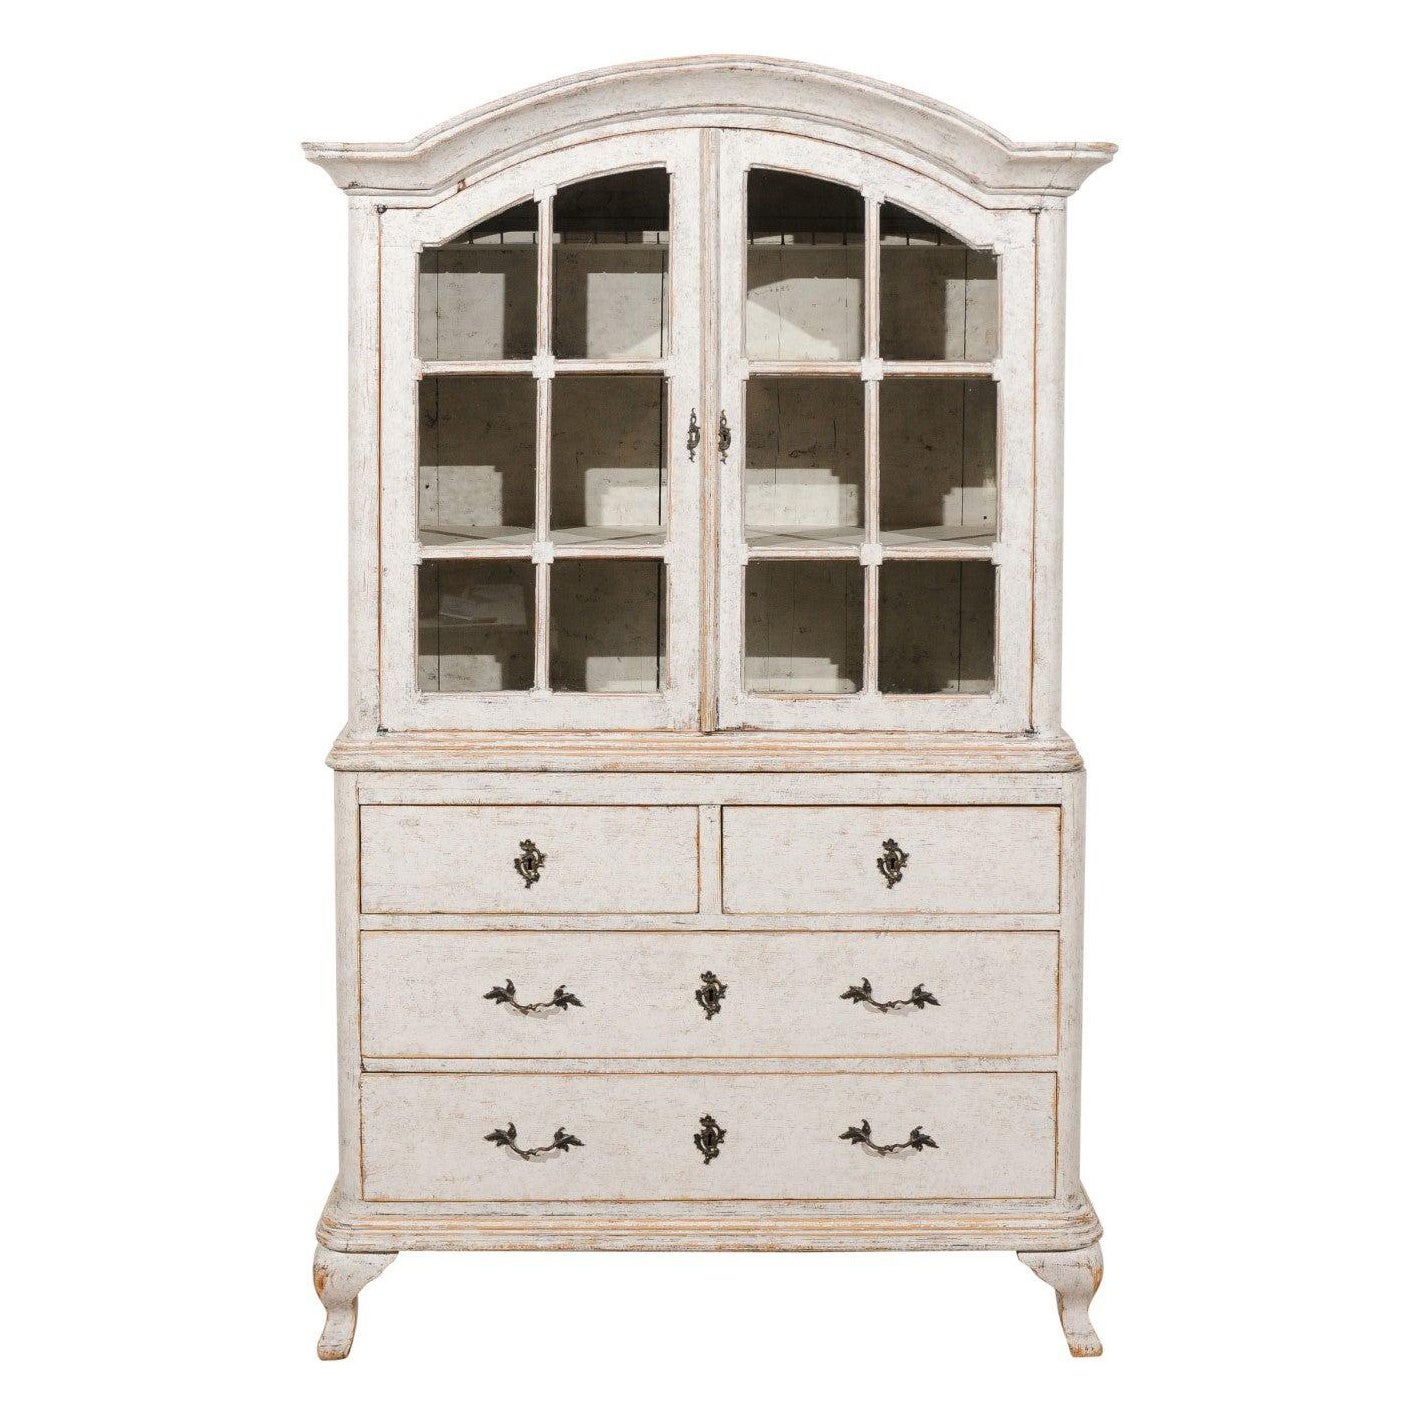 Swedish Rococo Style 19th Century Painted Vitrine with Glass Doors and Drawers For Sale